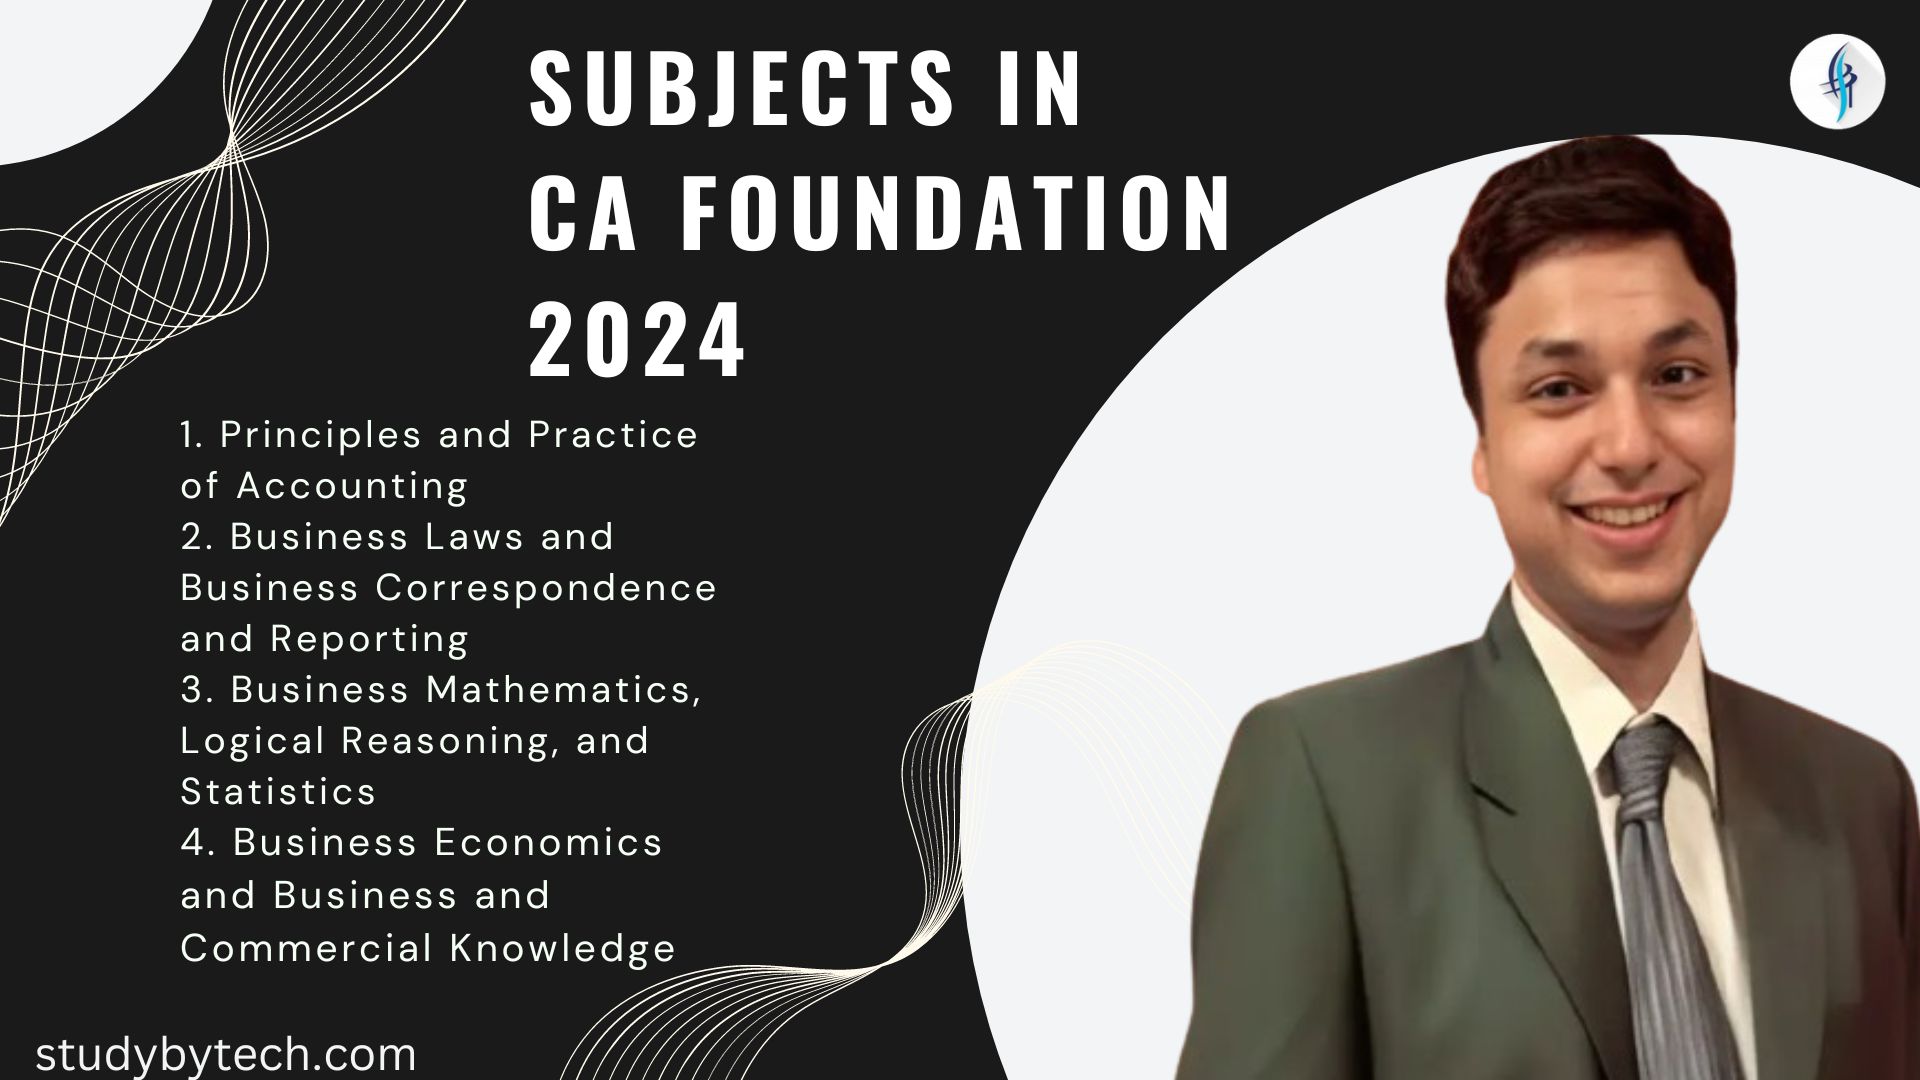 Subjects in CA Foundation 2024